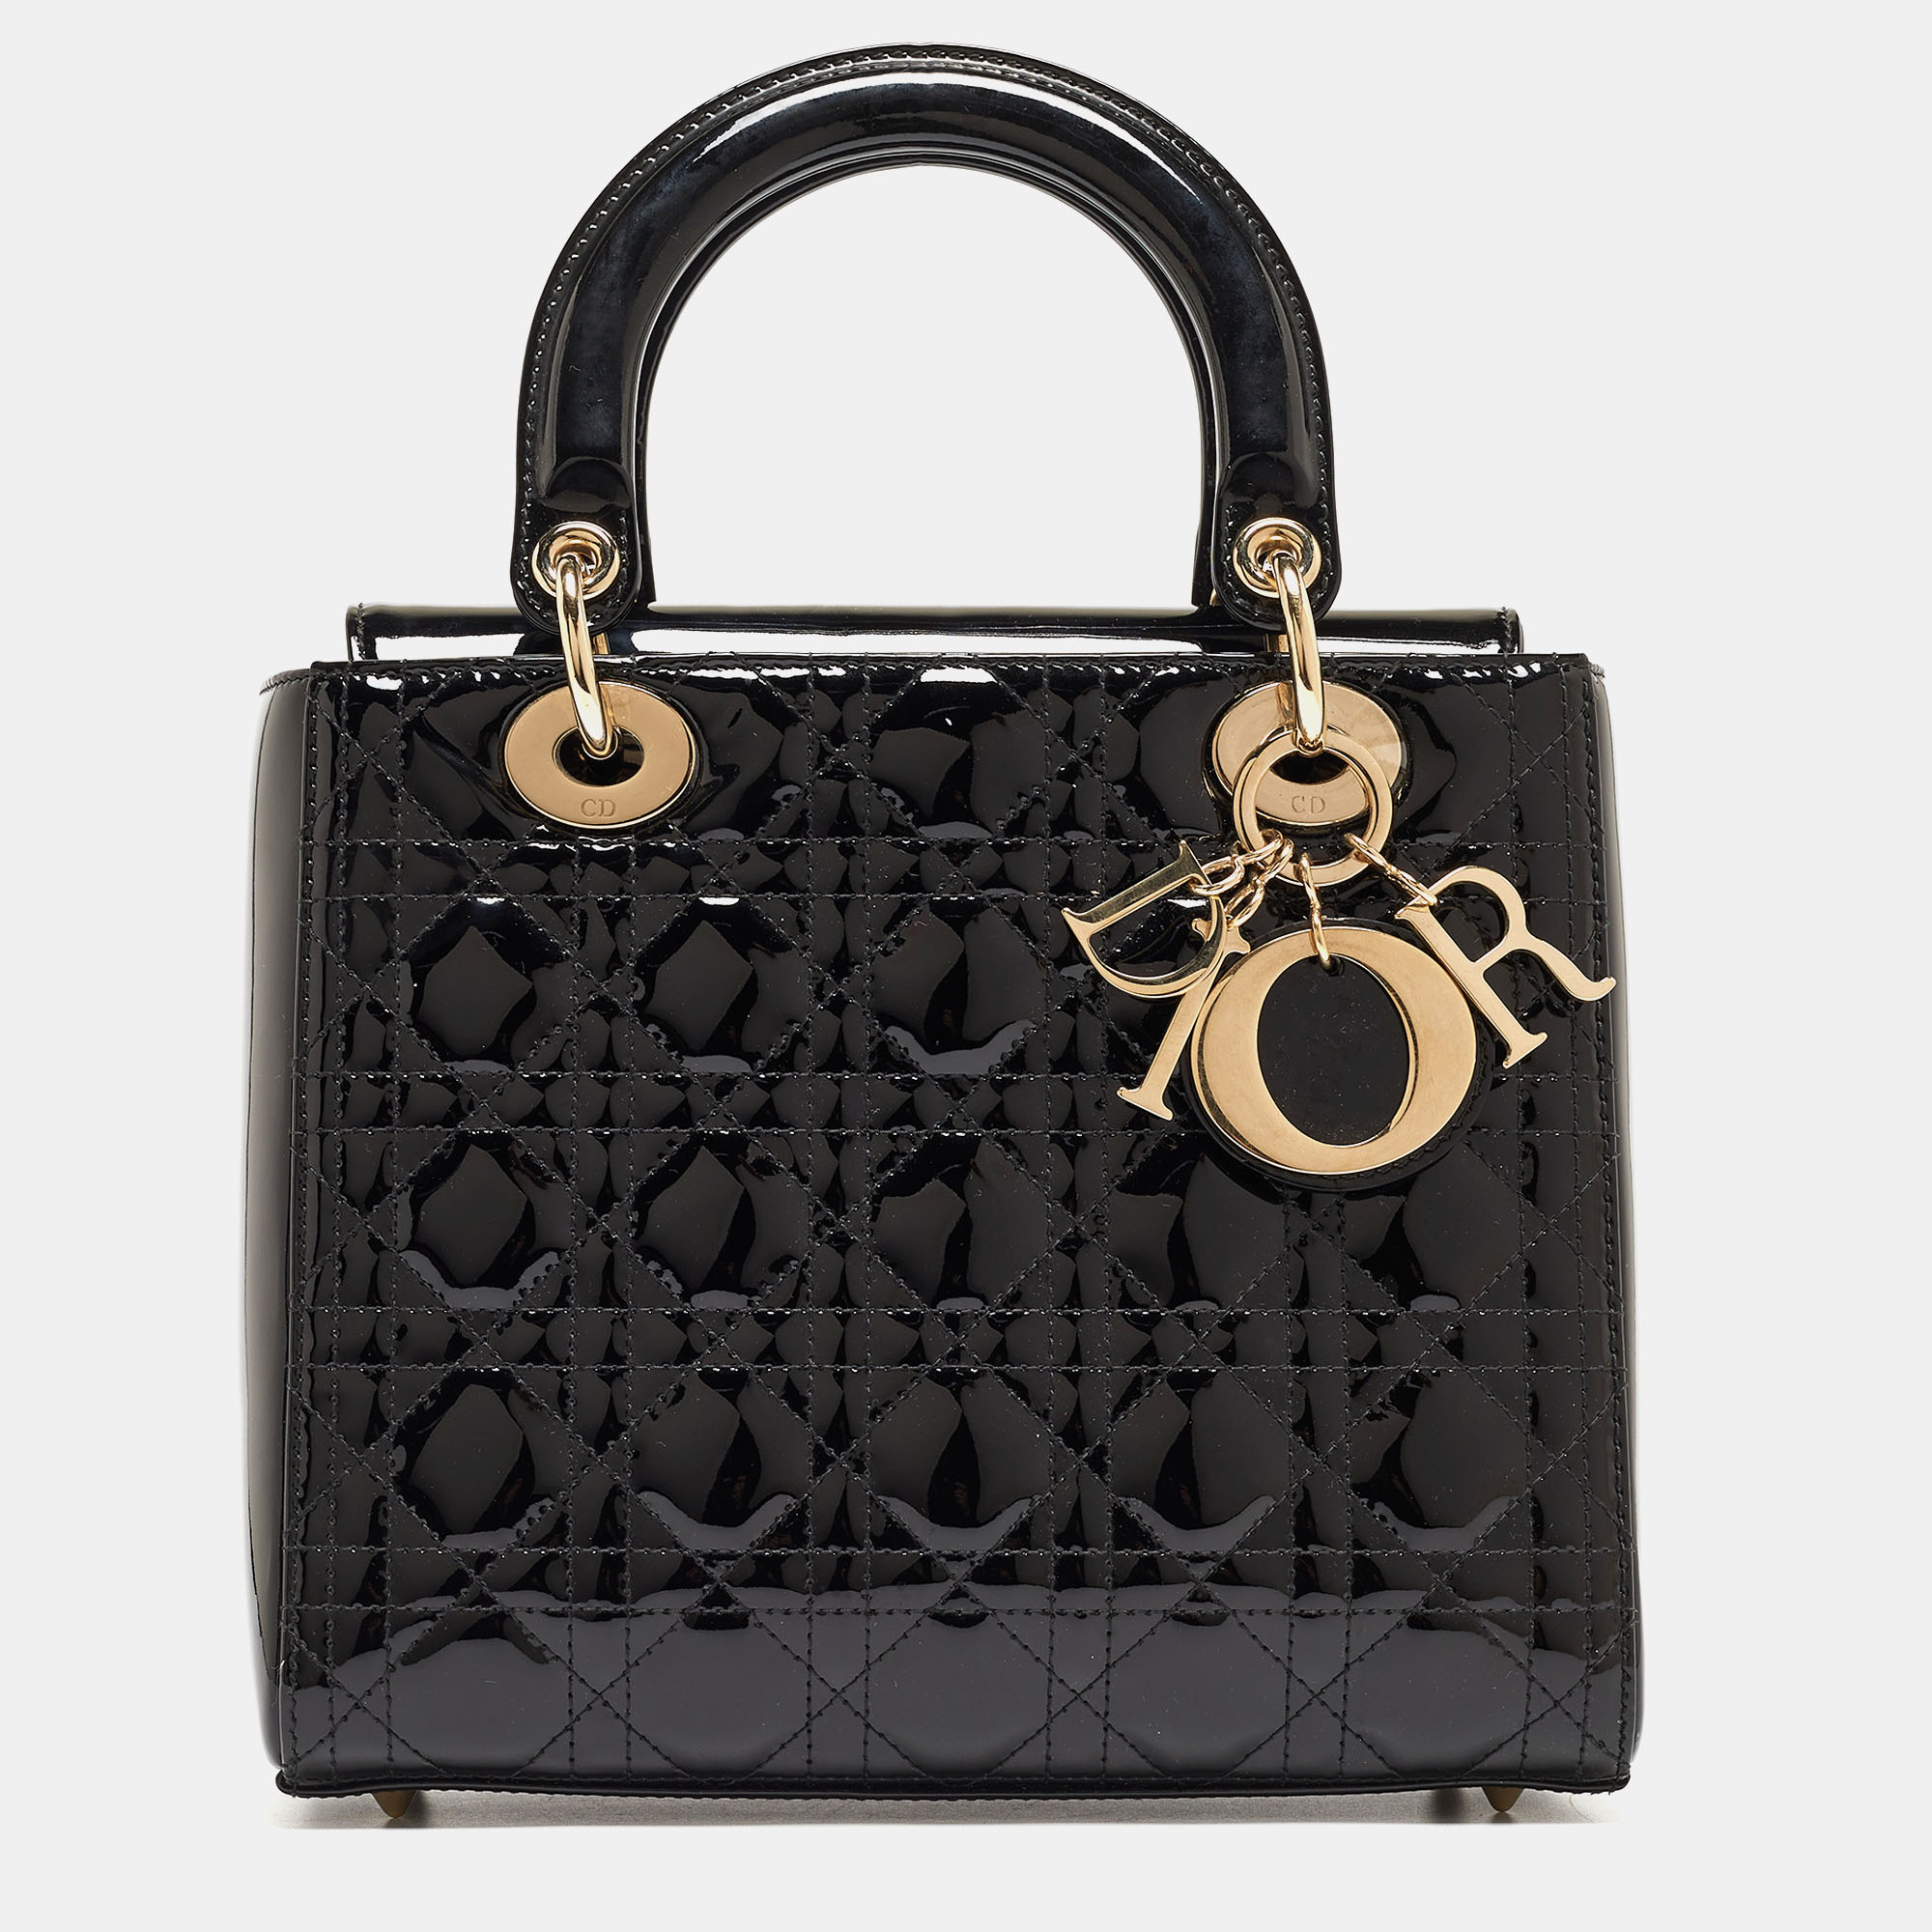 Ensure your days essentials are in order and your outfit is complete with this Lady Dior bag. Crafted using the best materials the bag carries the maisons signature of artful craftsmanship and enduring appeal.